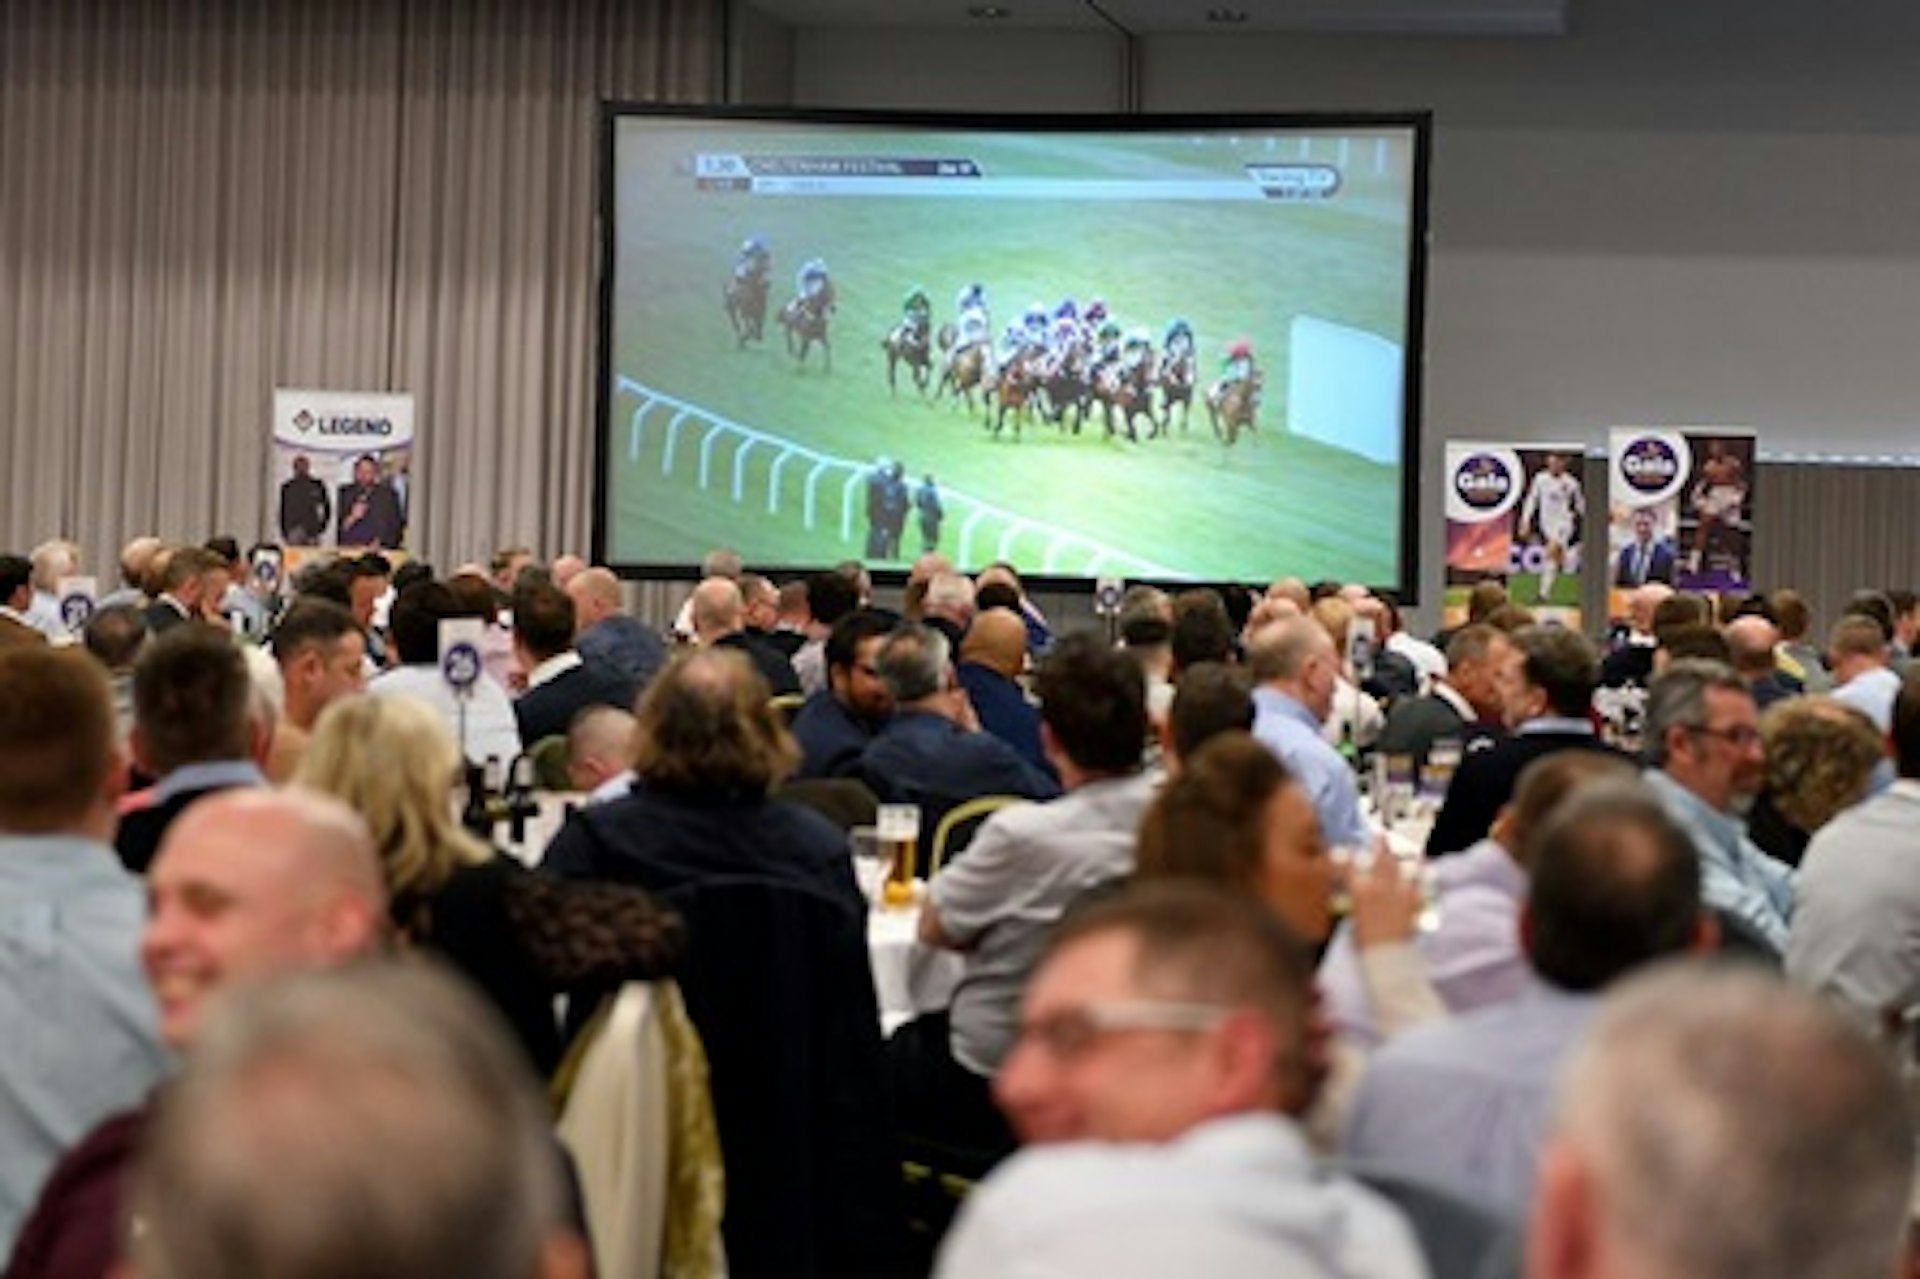 Cheltenham Gold Cup 2022 Screening with Lunch and Special Guest Speakers in Birmingham 3